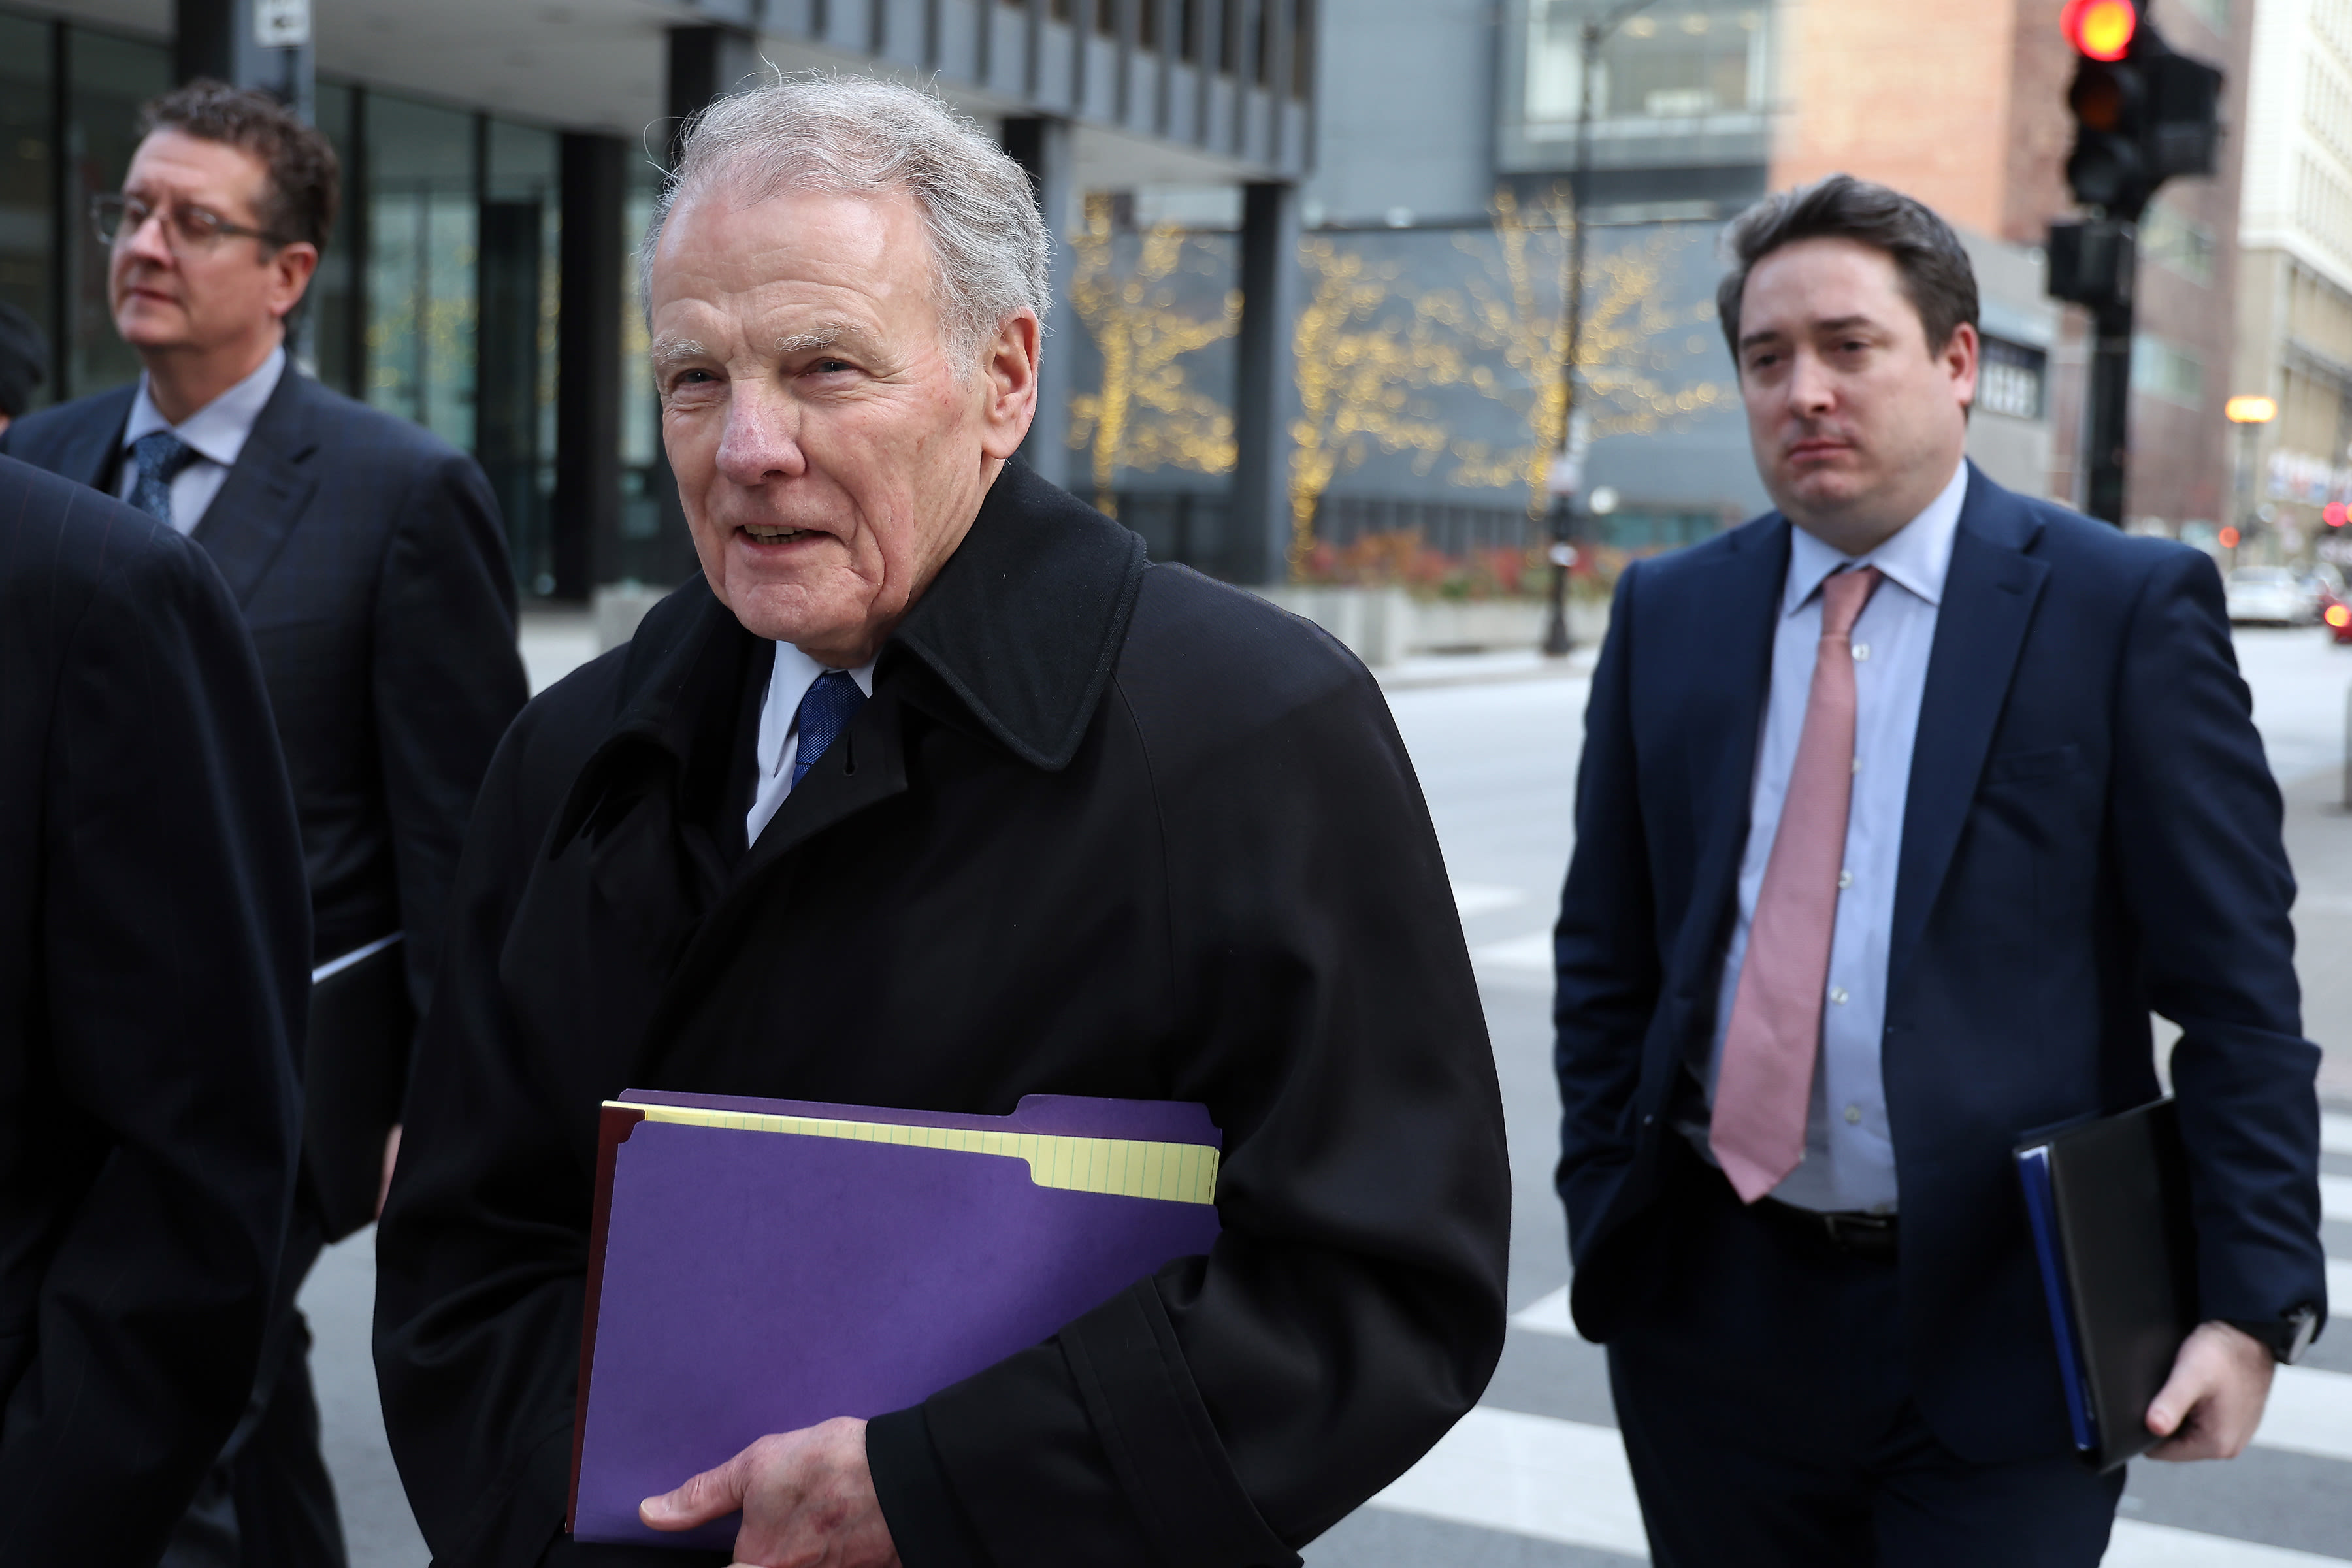 Illinois lawmakers quietly extend cellular law part of AT&T-Michael Madigan bribery case